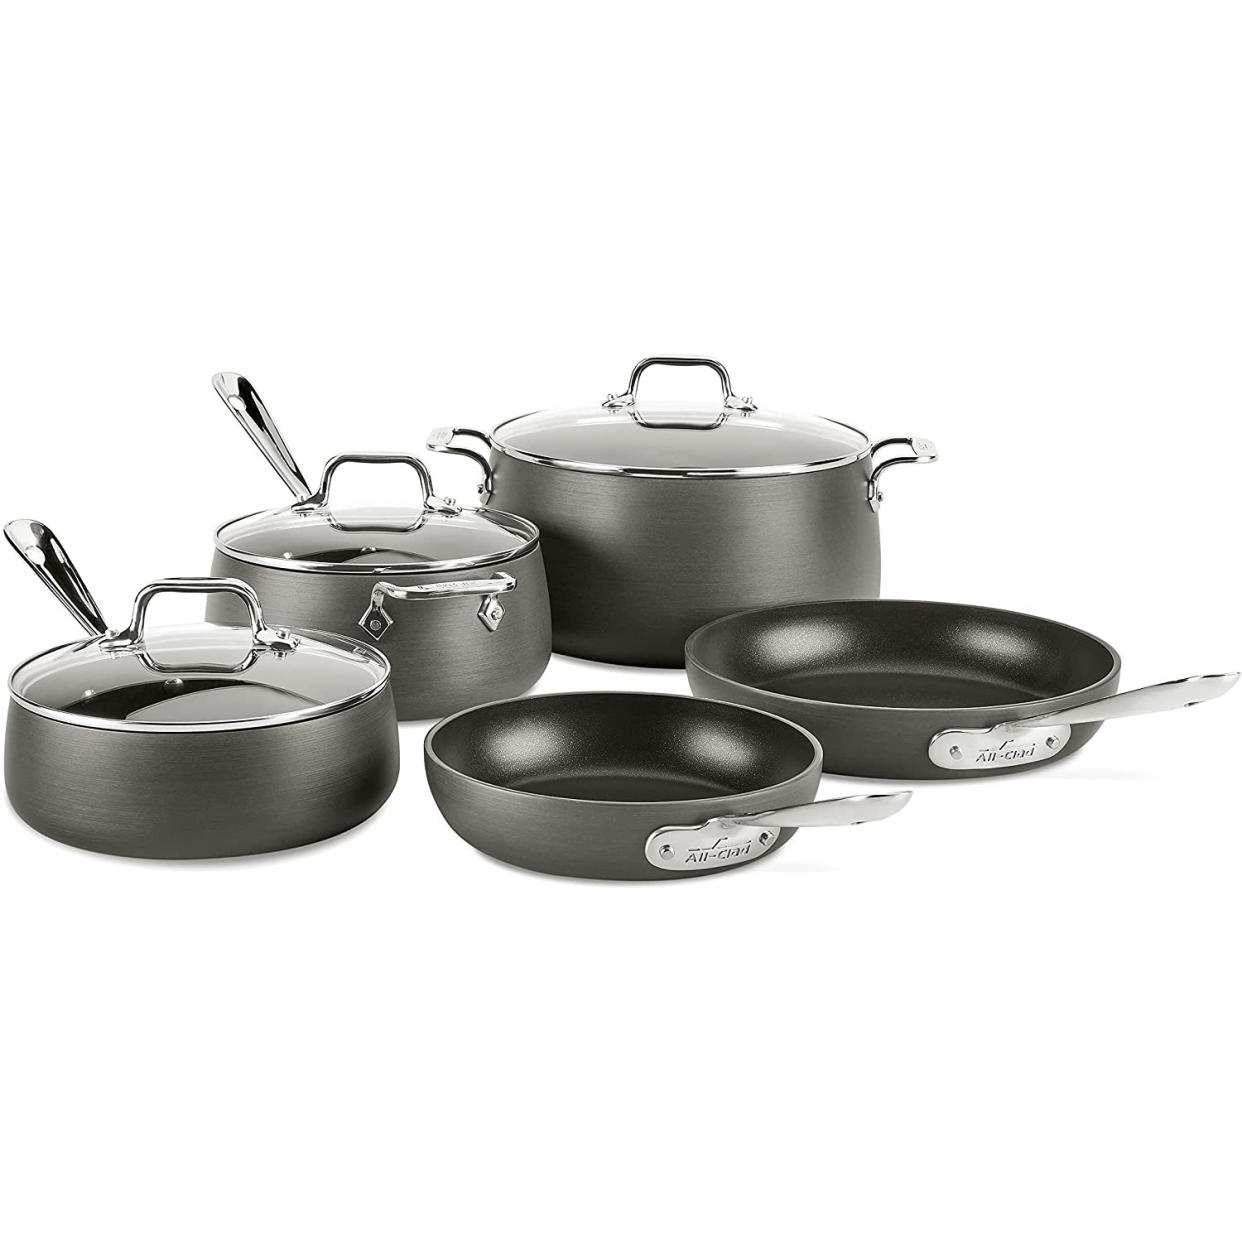 All-Clad anodized cookware set, Prime Day kitchen deals